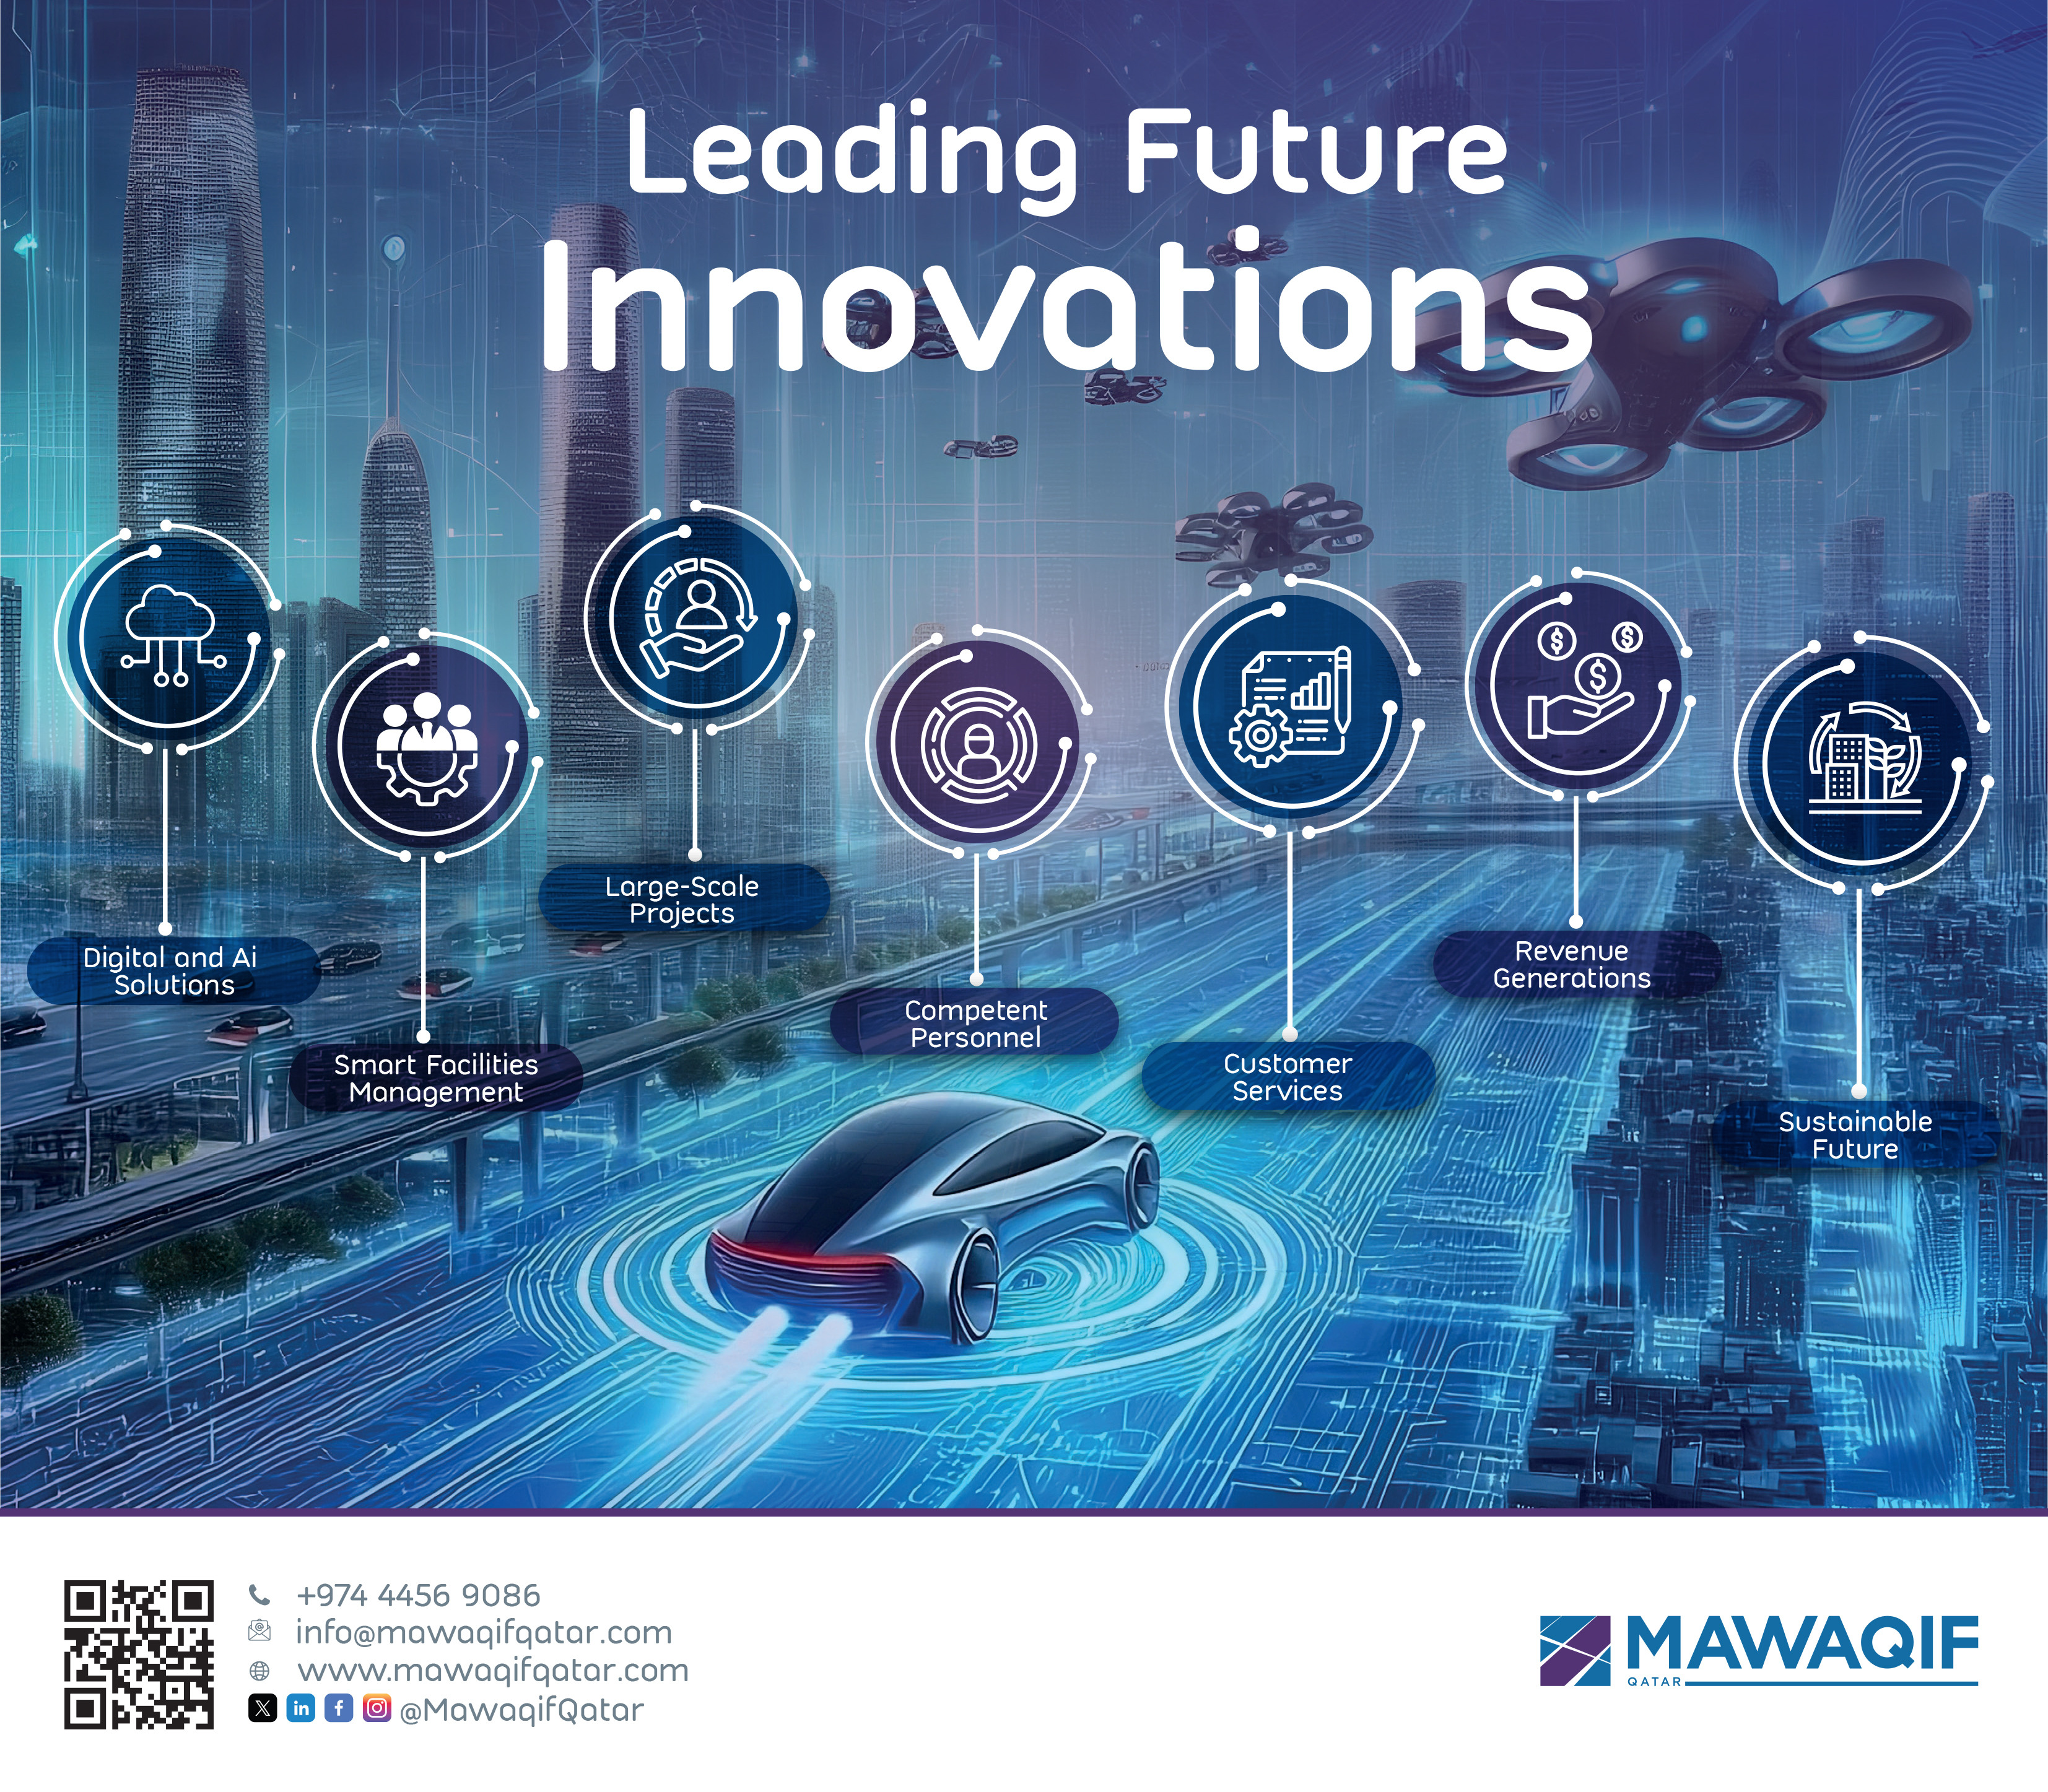 Mawaqif Qatar is making Space for 2050